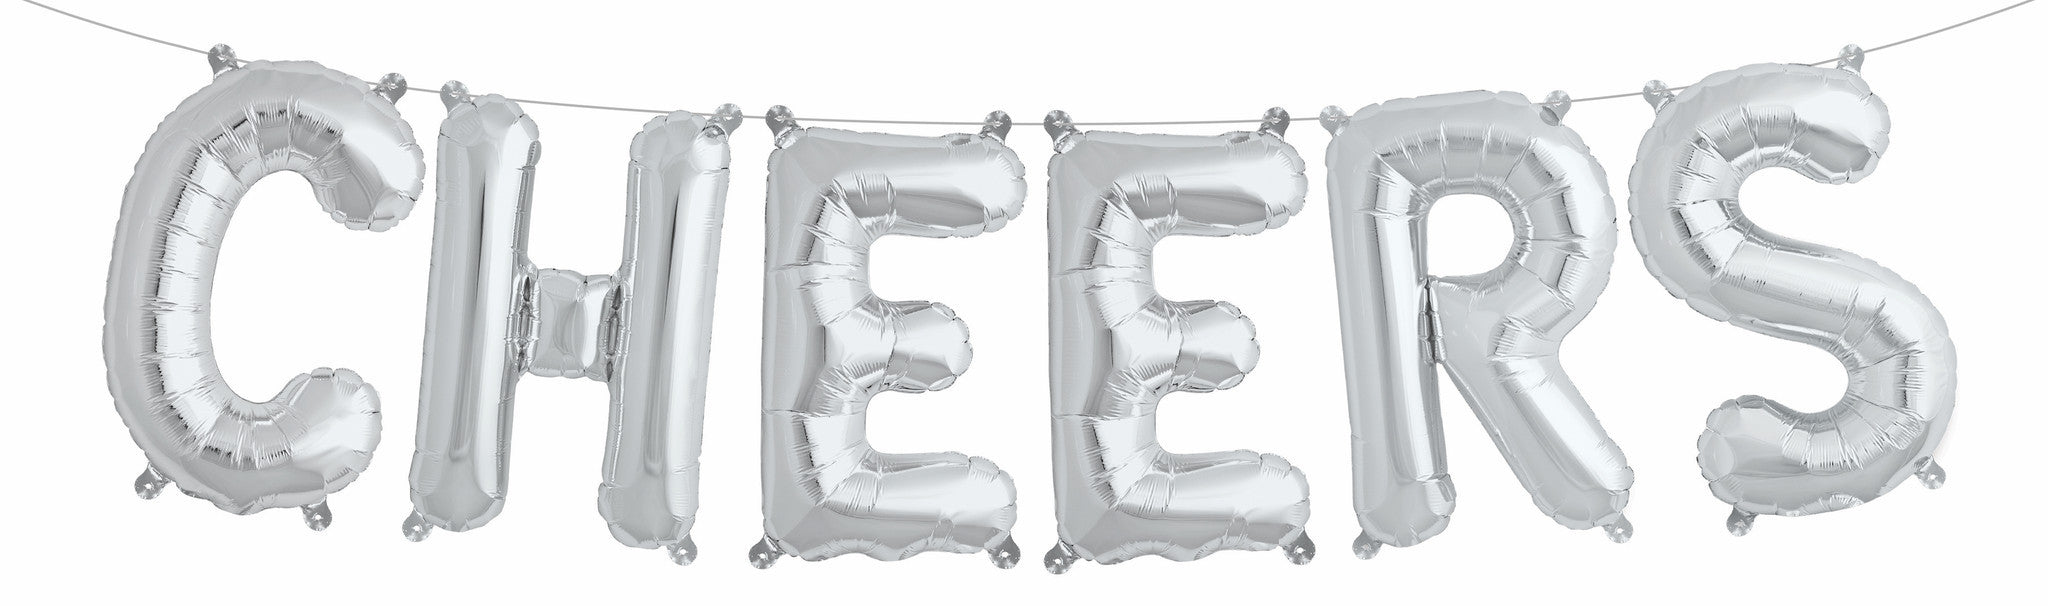 CHEERS Foil Balloon Kit - Air Fill Only